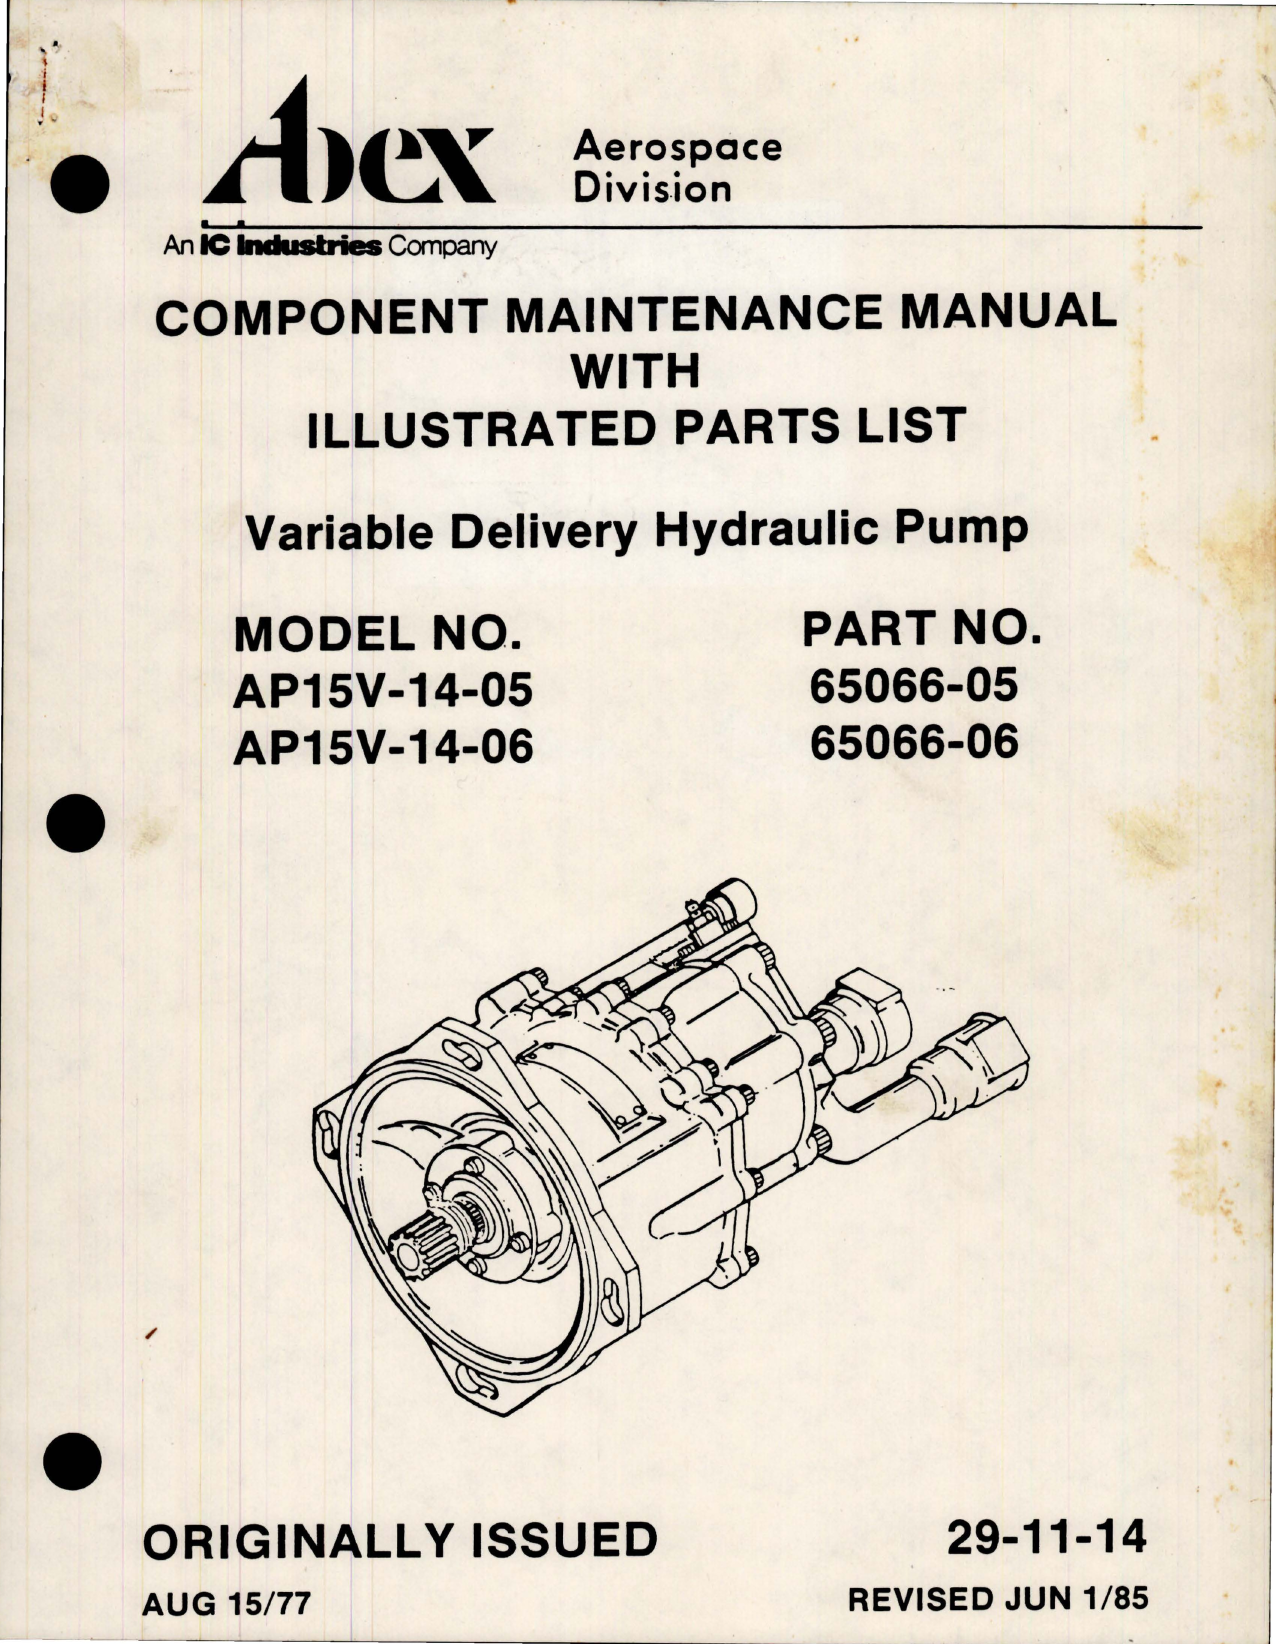 Sample page 1 from AirCorps Library document: Maintenance Manual w Parts List for Variable Delivery Hydraulic Pump - Parts 65066-05 and 65066-06